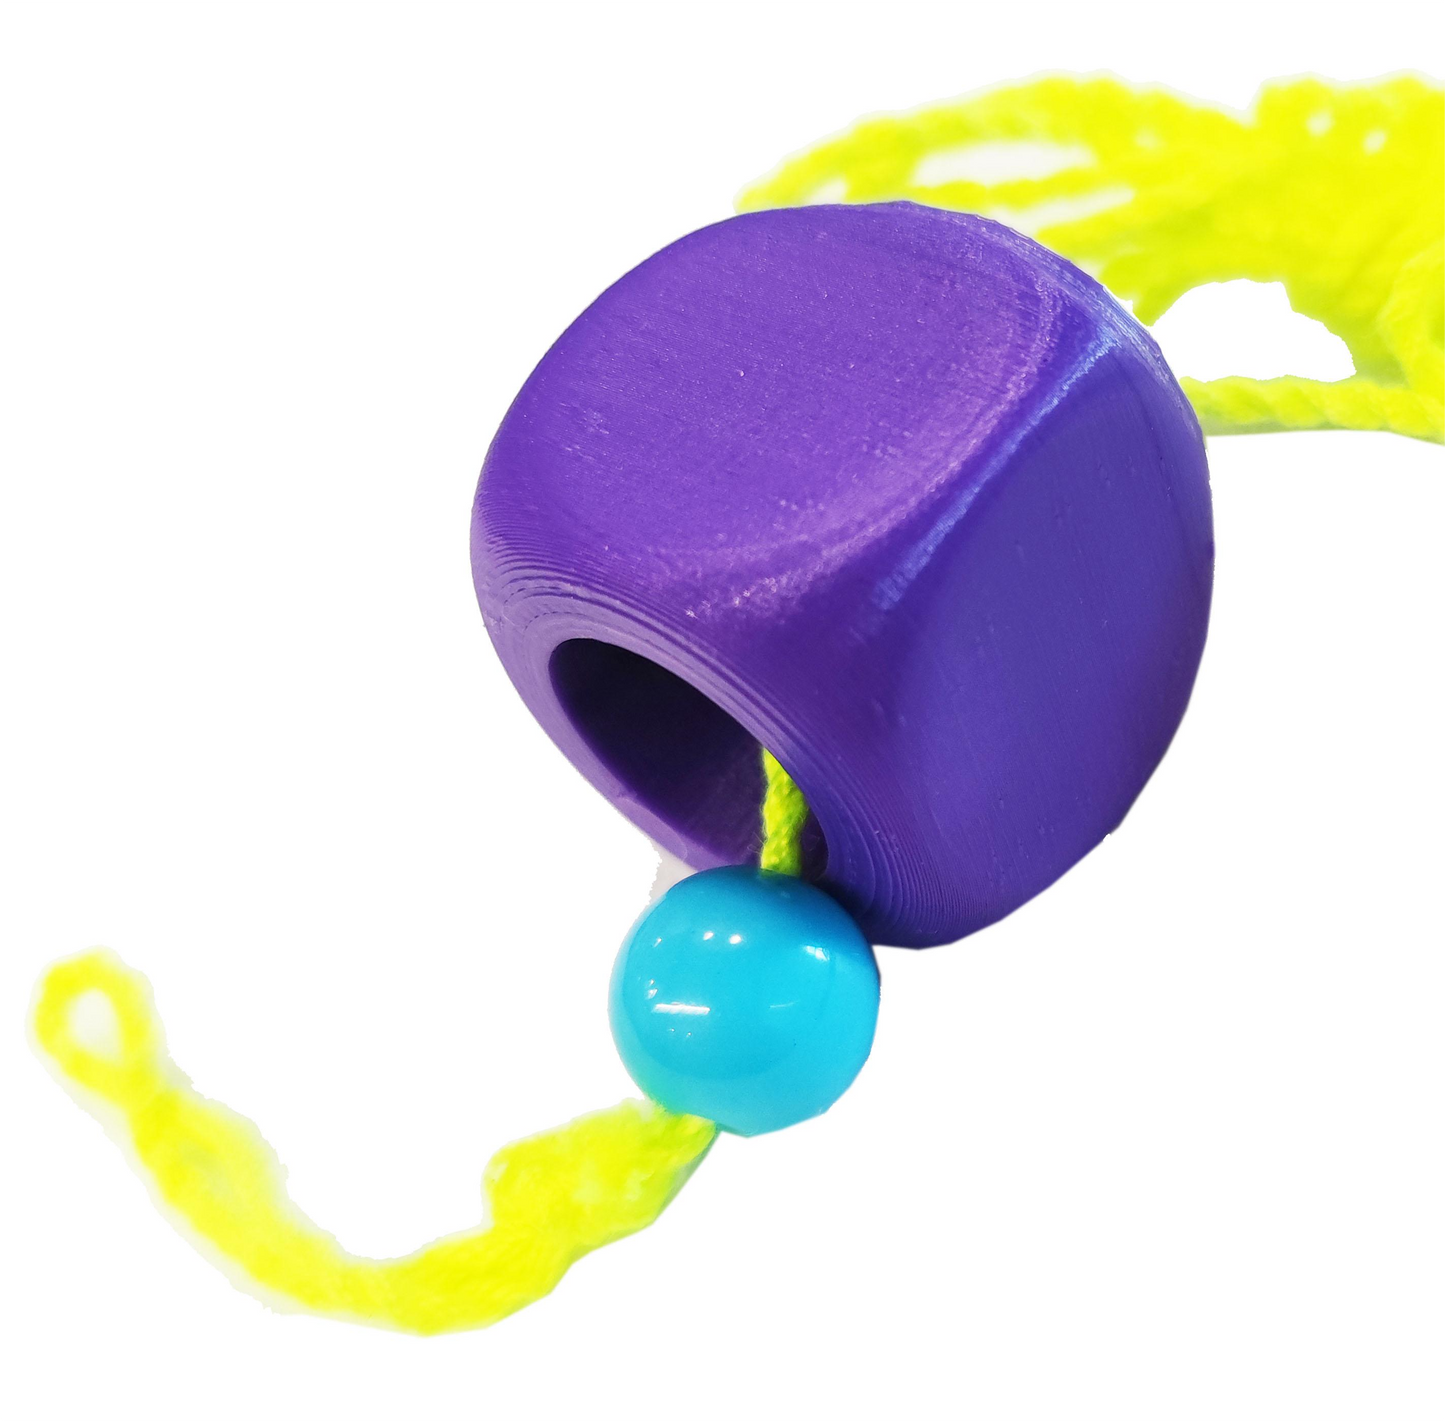 Yoyo string with counterweight